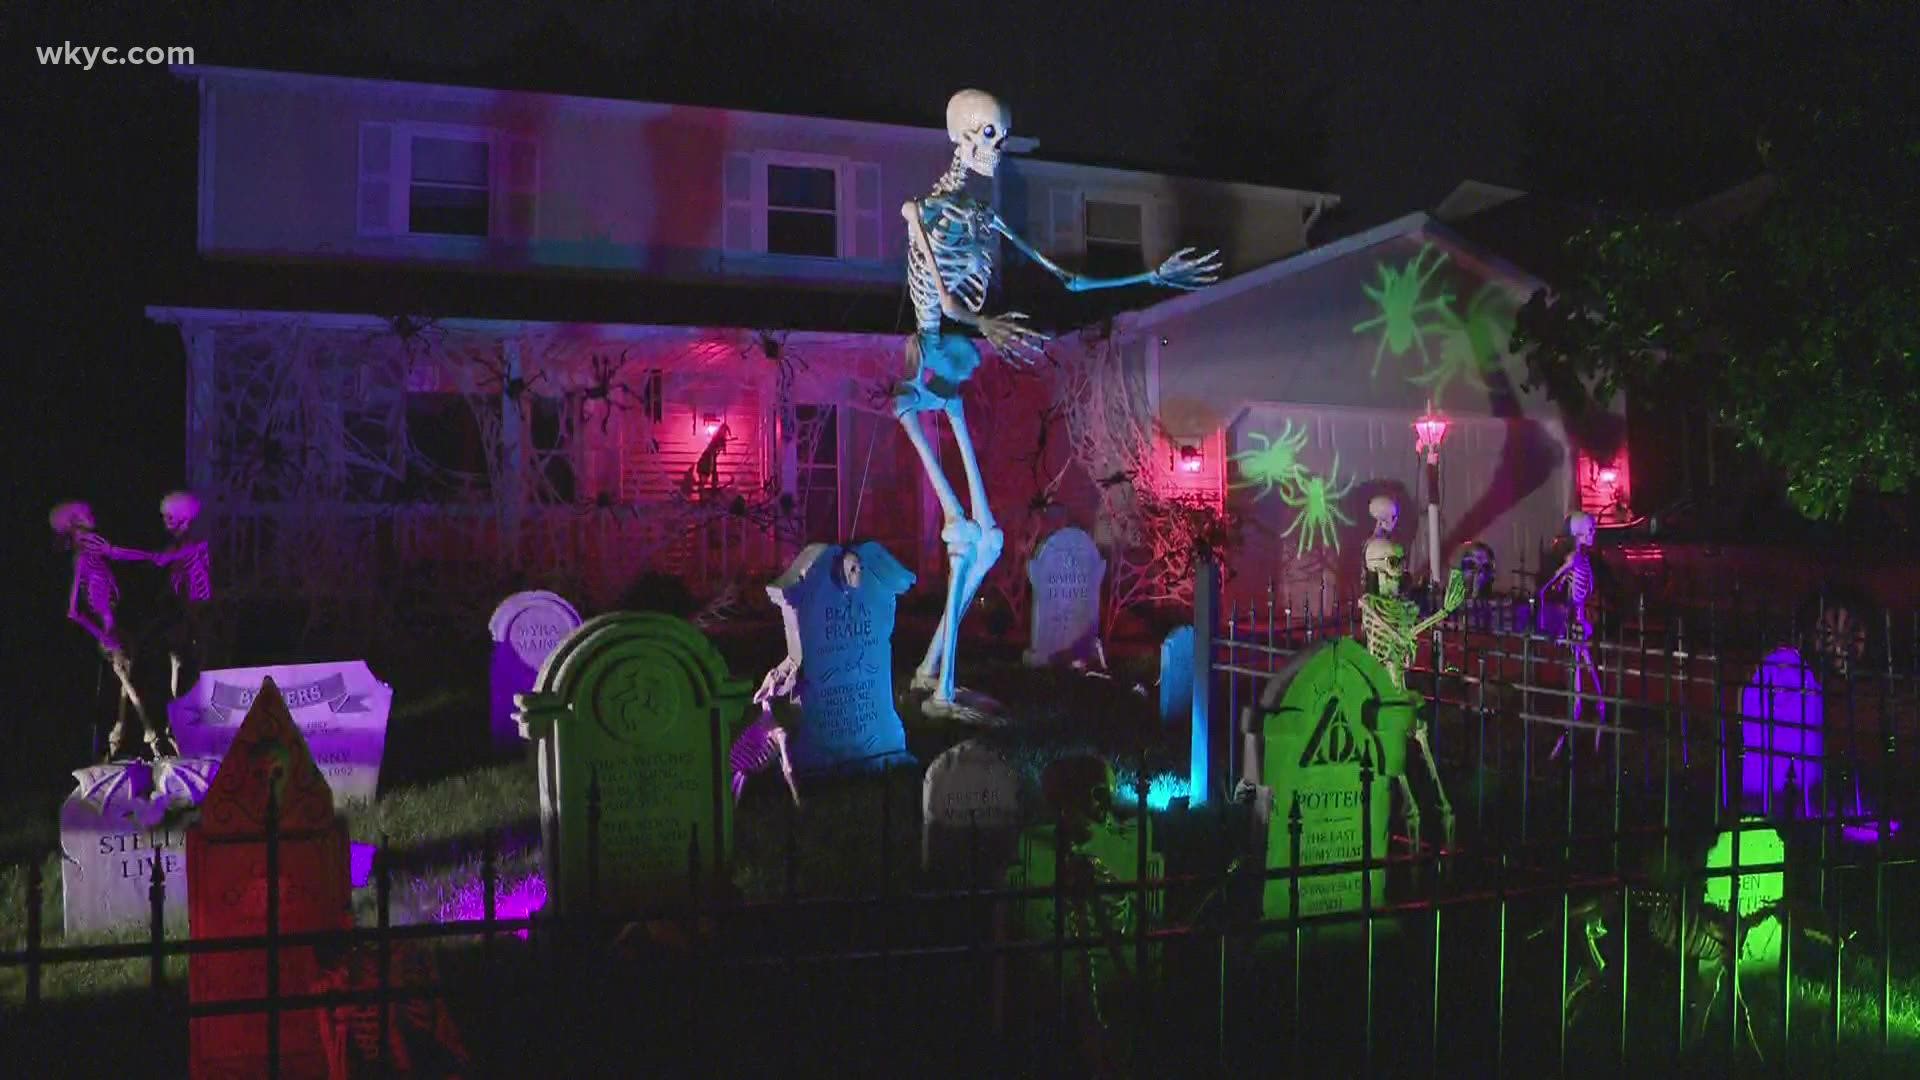 Check out this fun Halloween house in the 1100 block of Gettysburg Drive in Parma.